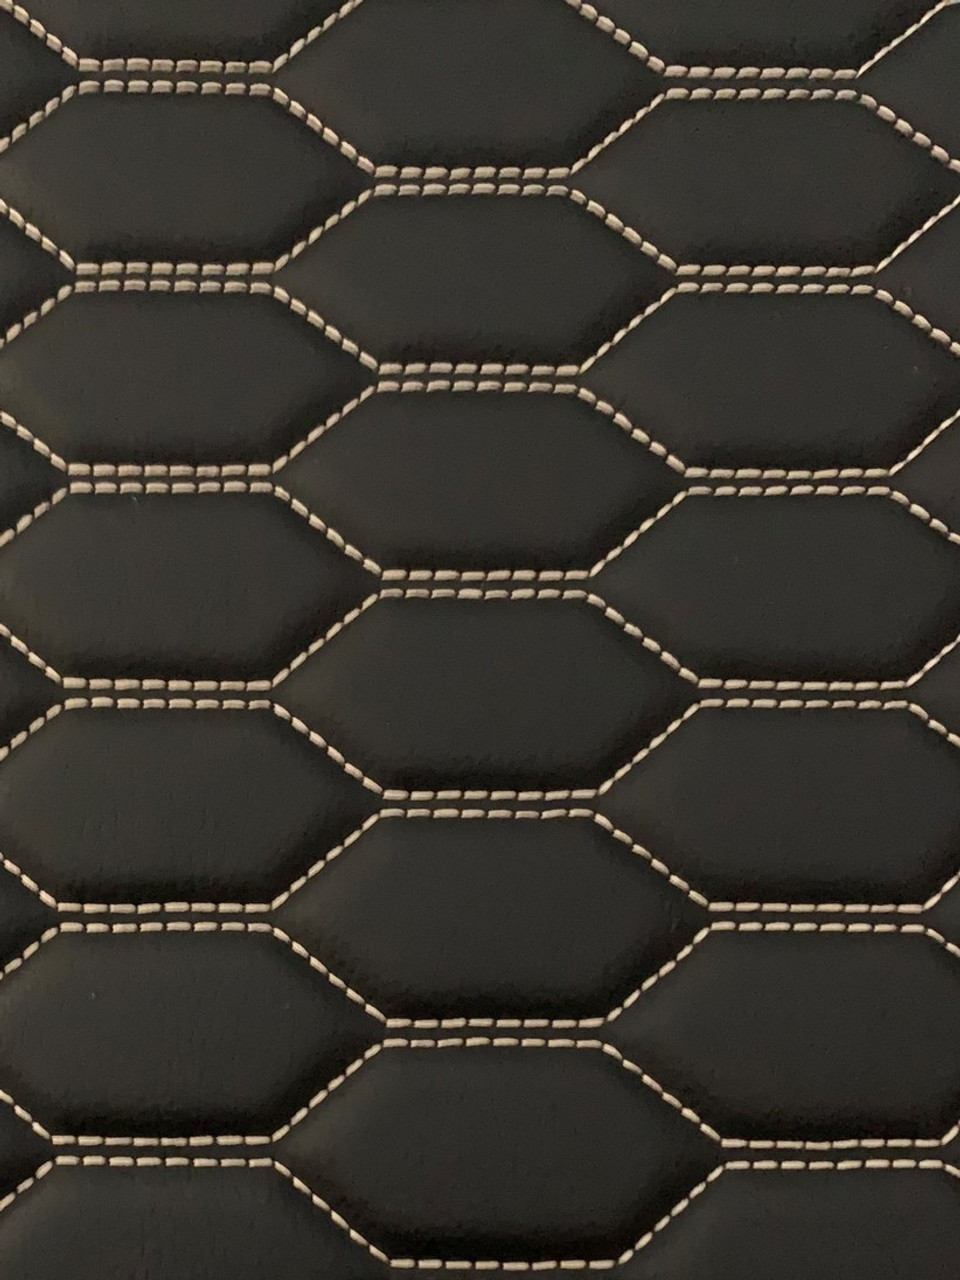 Quilted automotive grade black vinyl with white-gold stitching